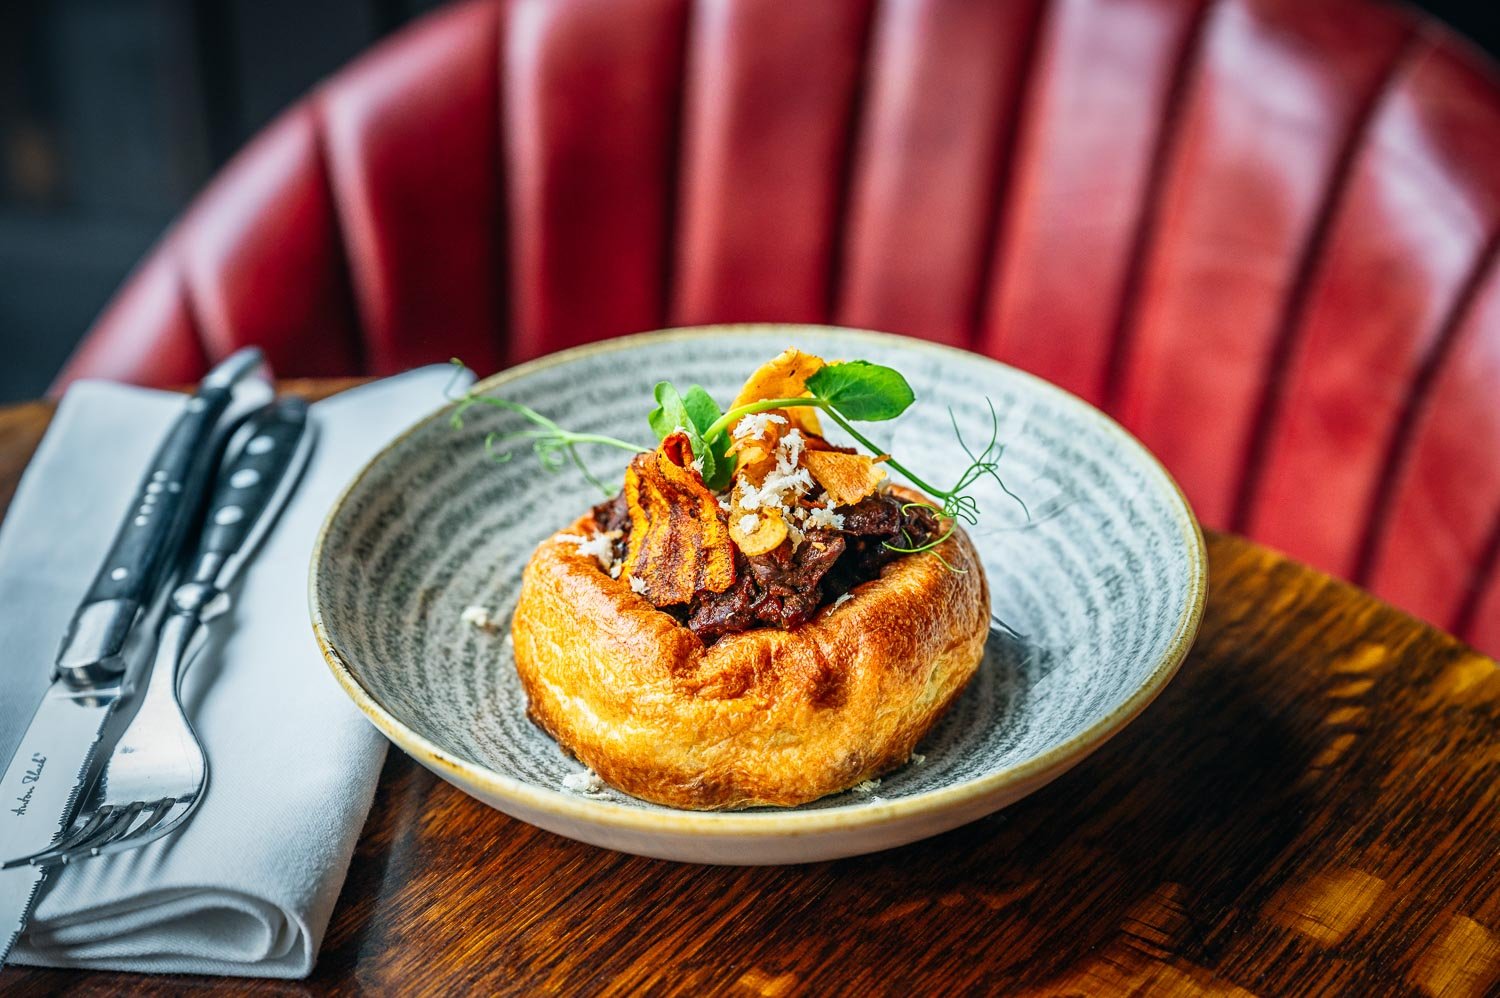 New menu must try.

Our Slow Braised Beef Yorkie is exactly that. A yorkshire pudding filled with braised beef, vegetable crisps and horseradish. Roast fans must give this a try!

#yorkshirepudding #cambridgechophouse #newmenu